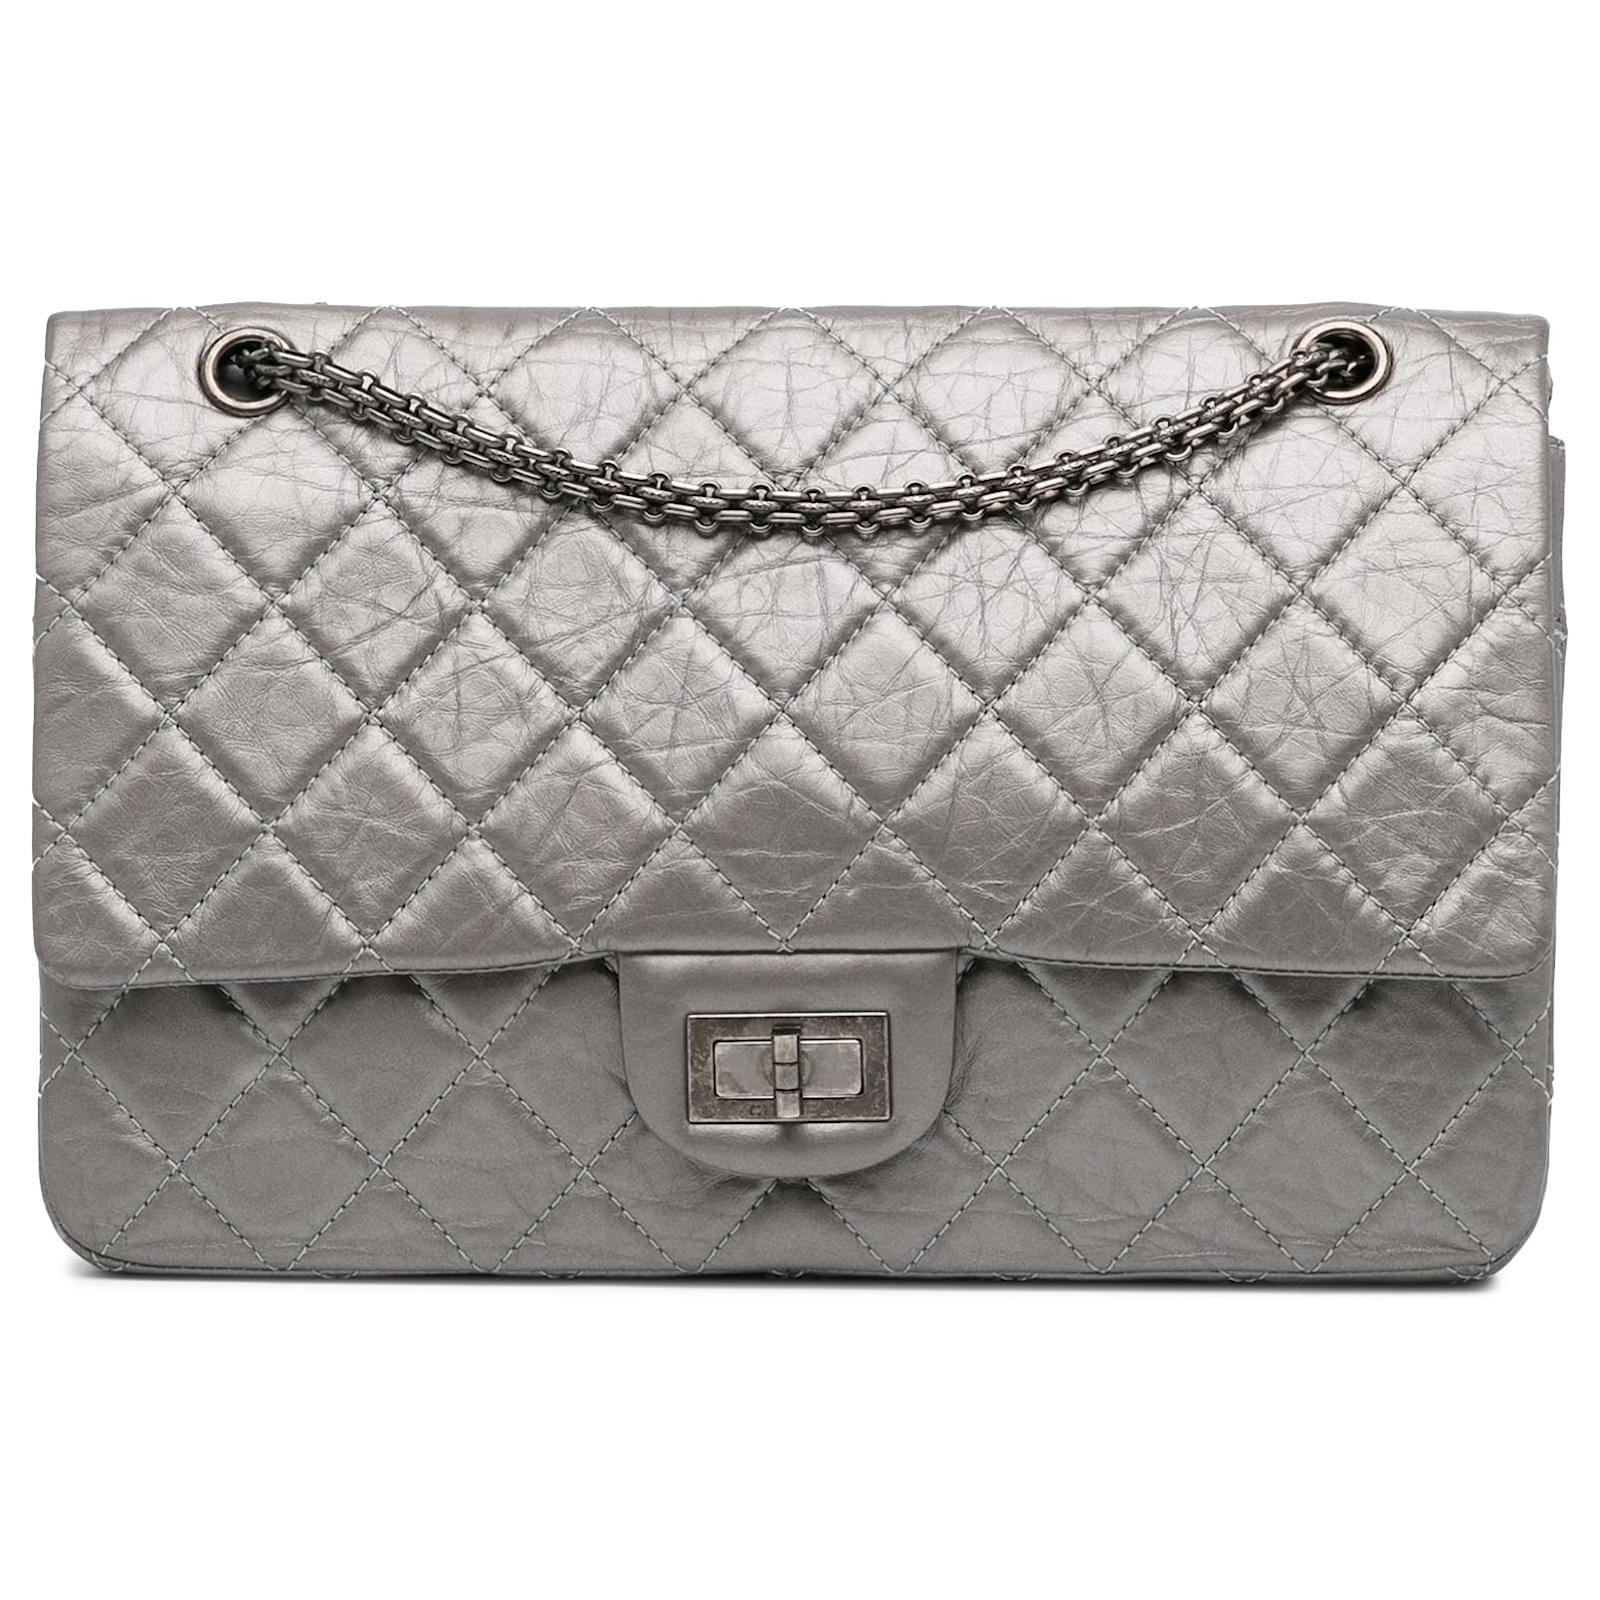 Chanel Silver Reissue 2.55 Aged Calfskin Double Flap 227 Silvery